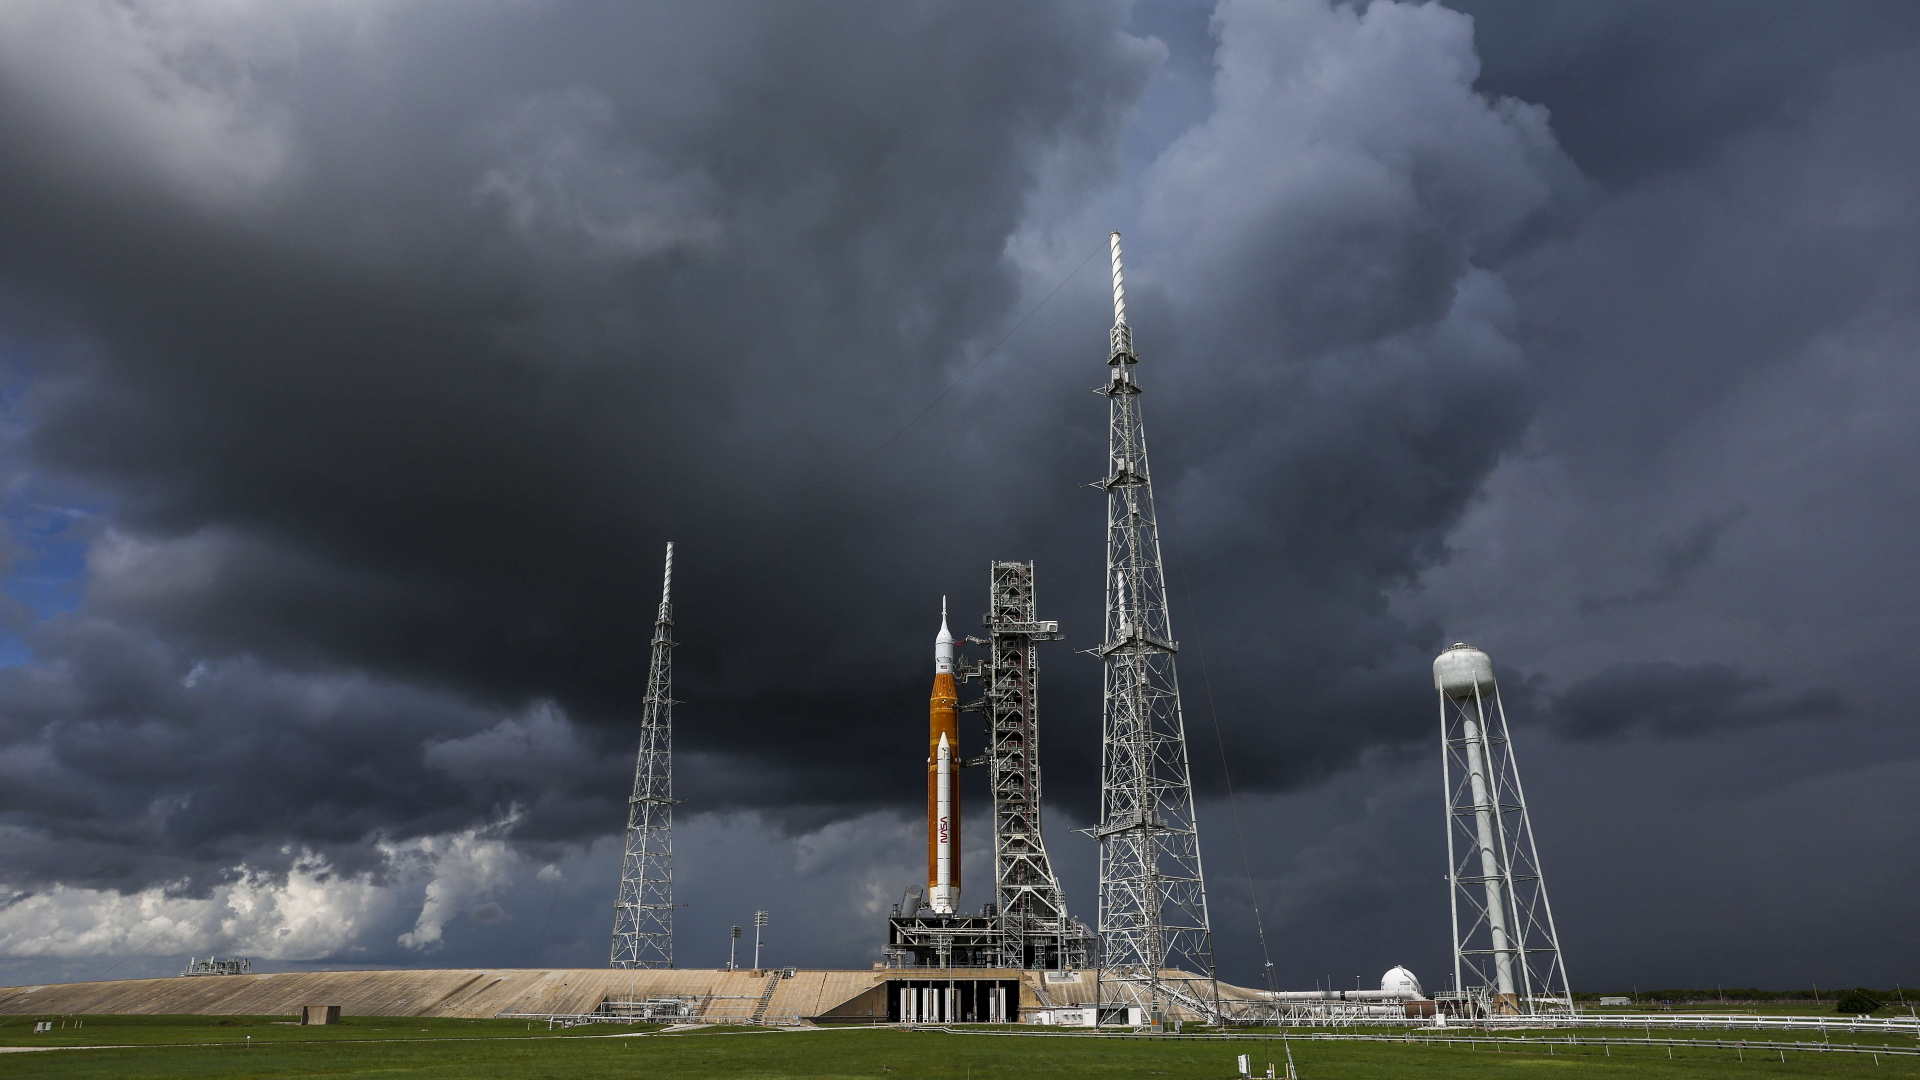 Die Artemis-Rakete am Kennedy Space Center in Cape Canaveral, Florida. | AFP